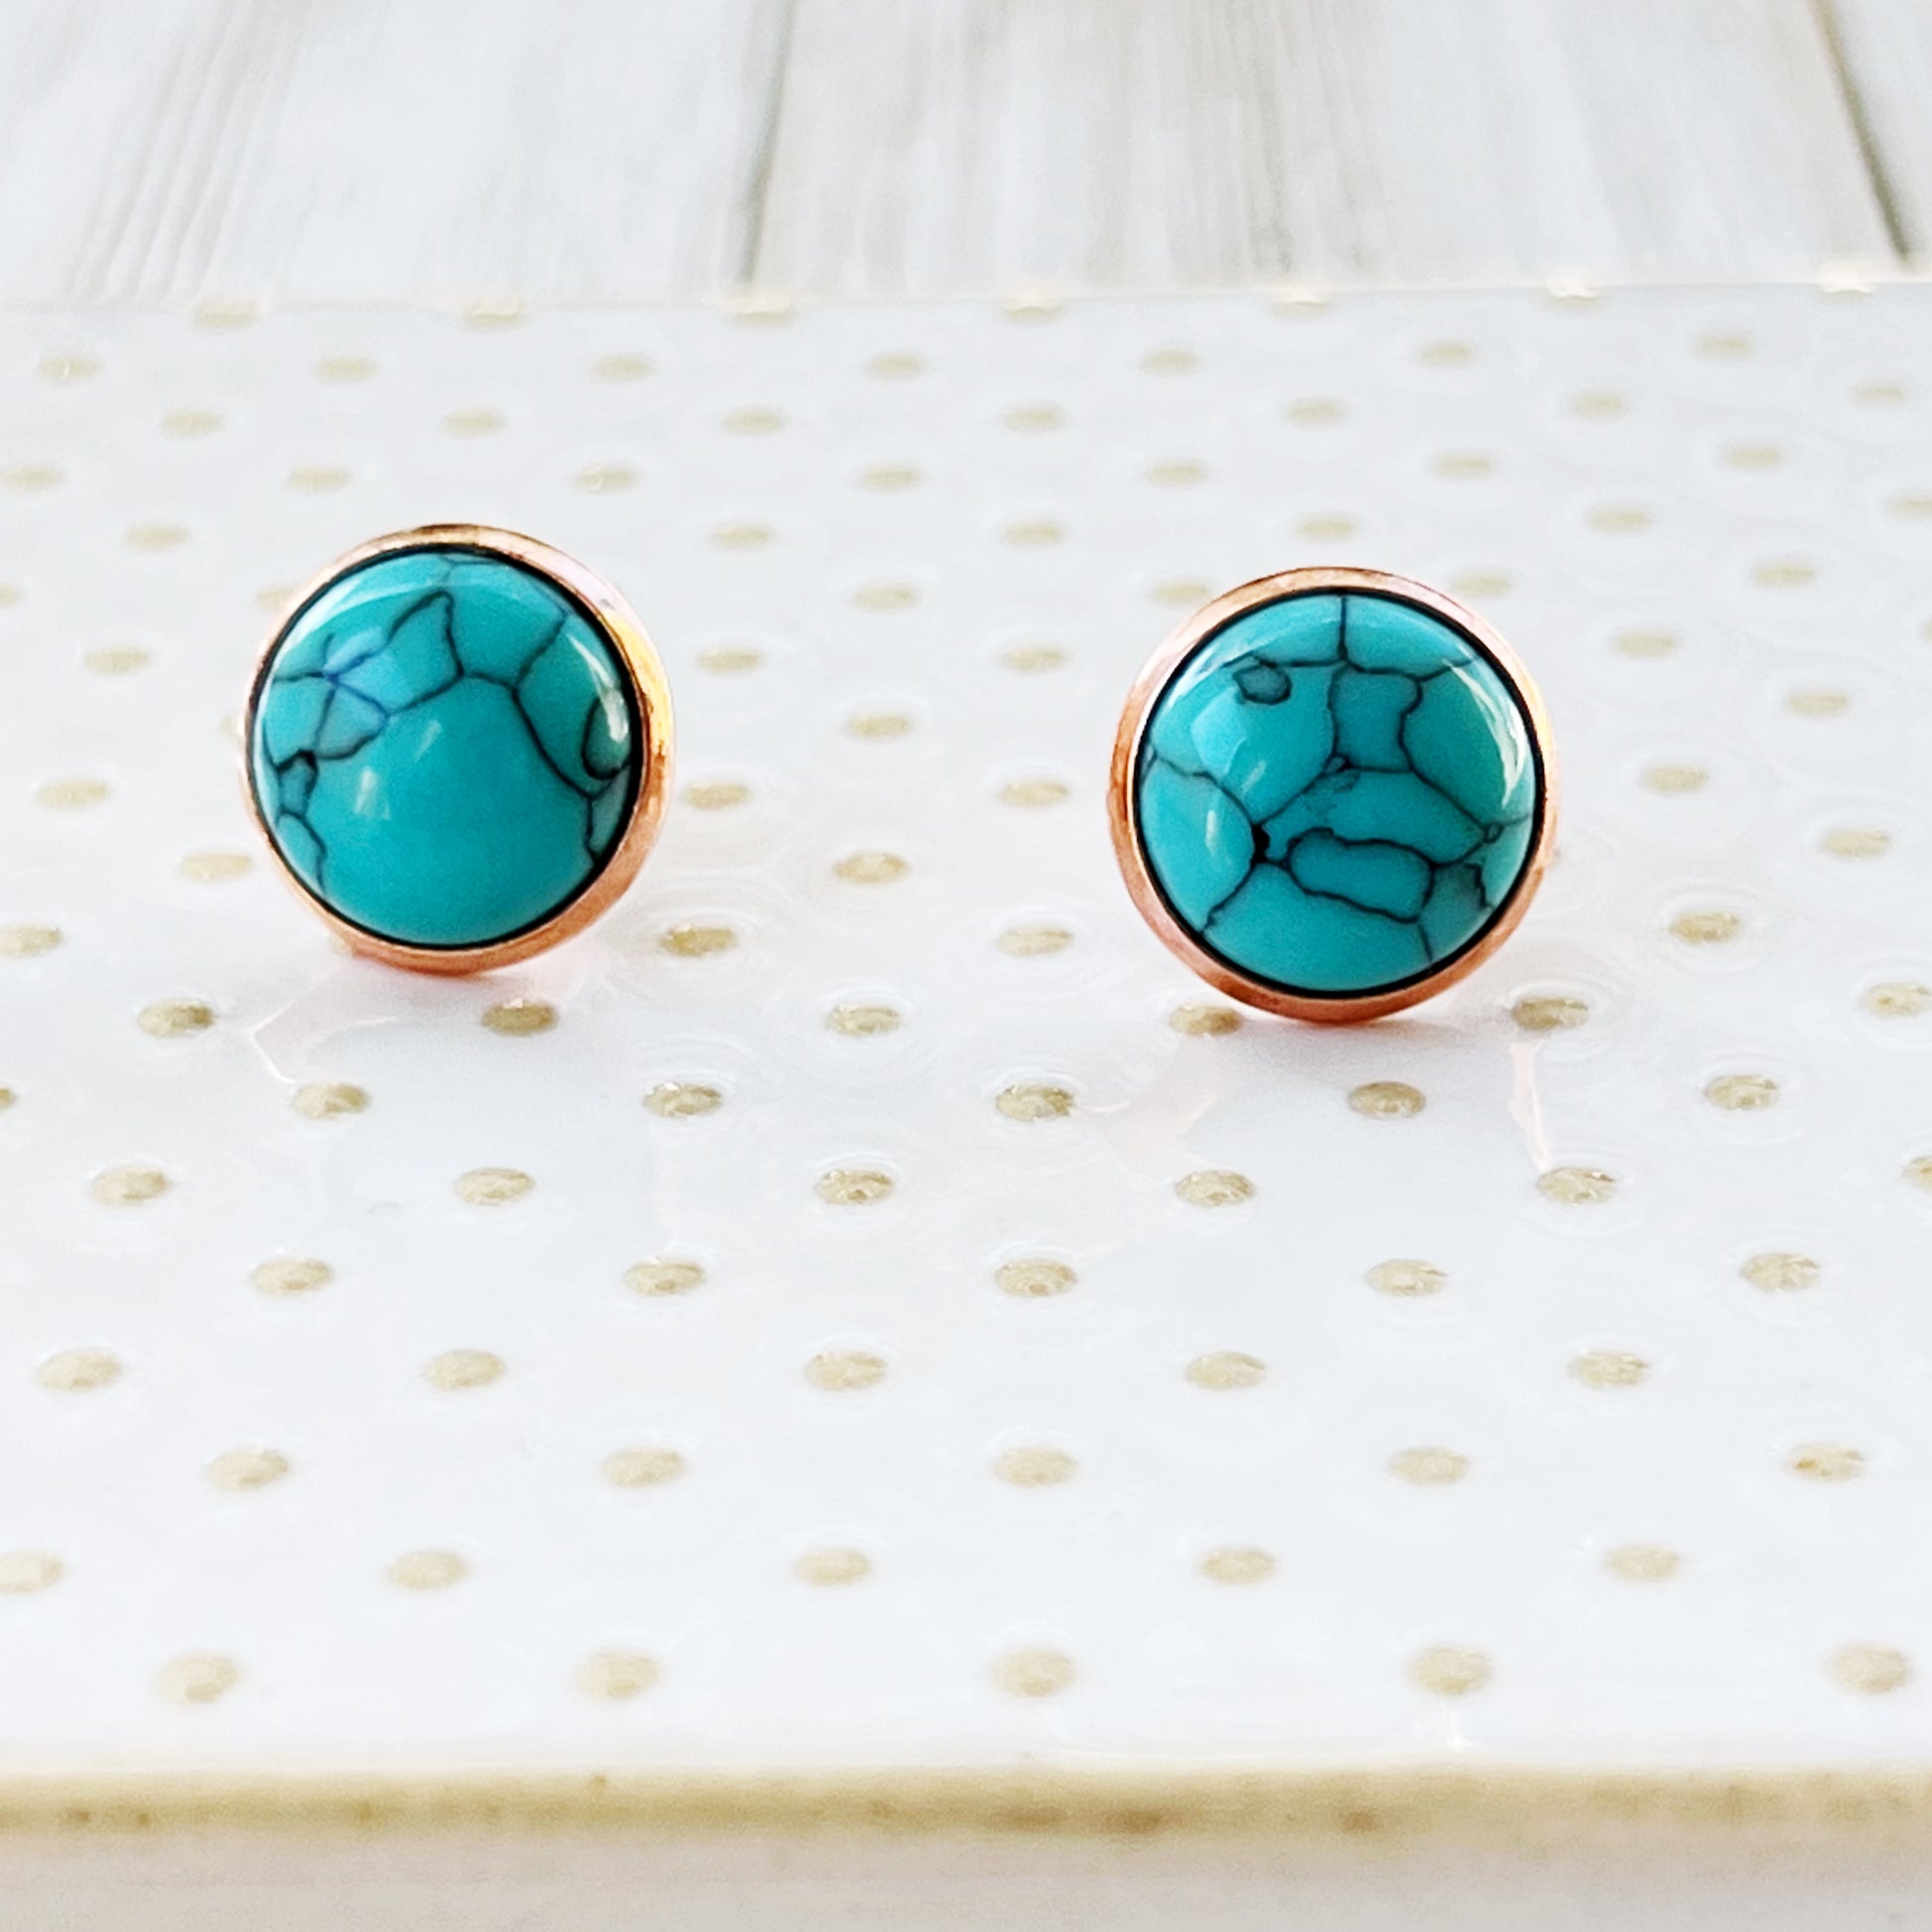 Turquoise Rose Gold Stud Earrings: Boho Western Charm for Unique Style Statements